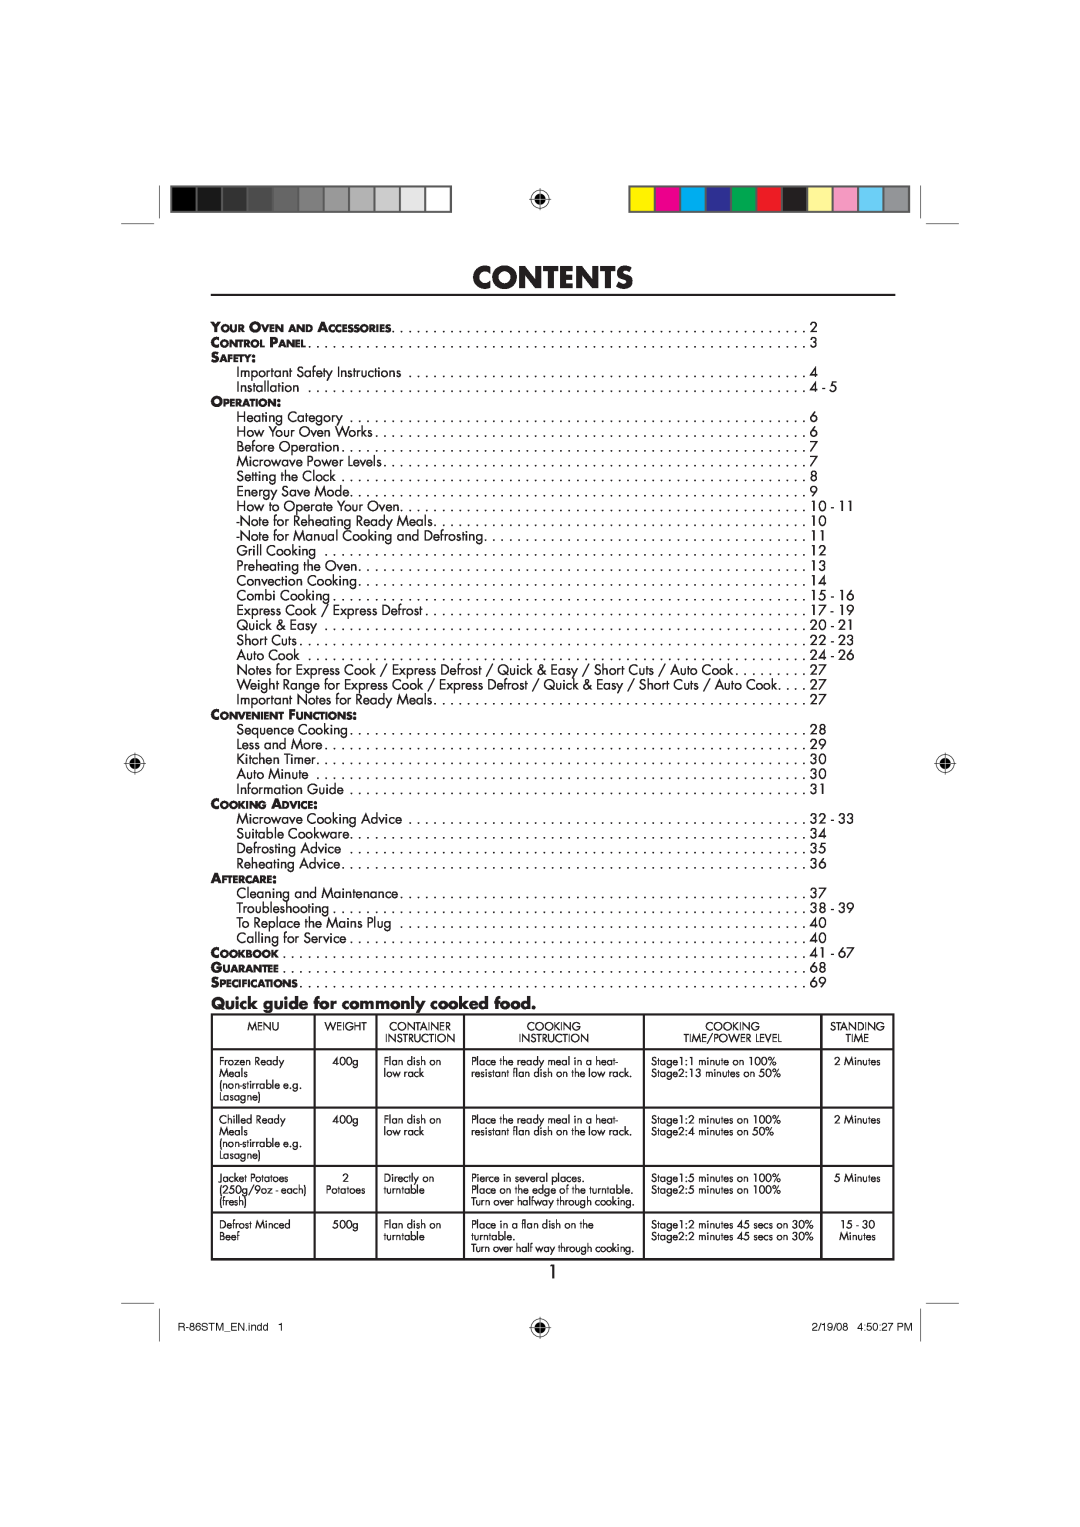 Sharp R-86STM manual Contents, Quick guide for commonly cooked food 